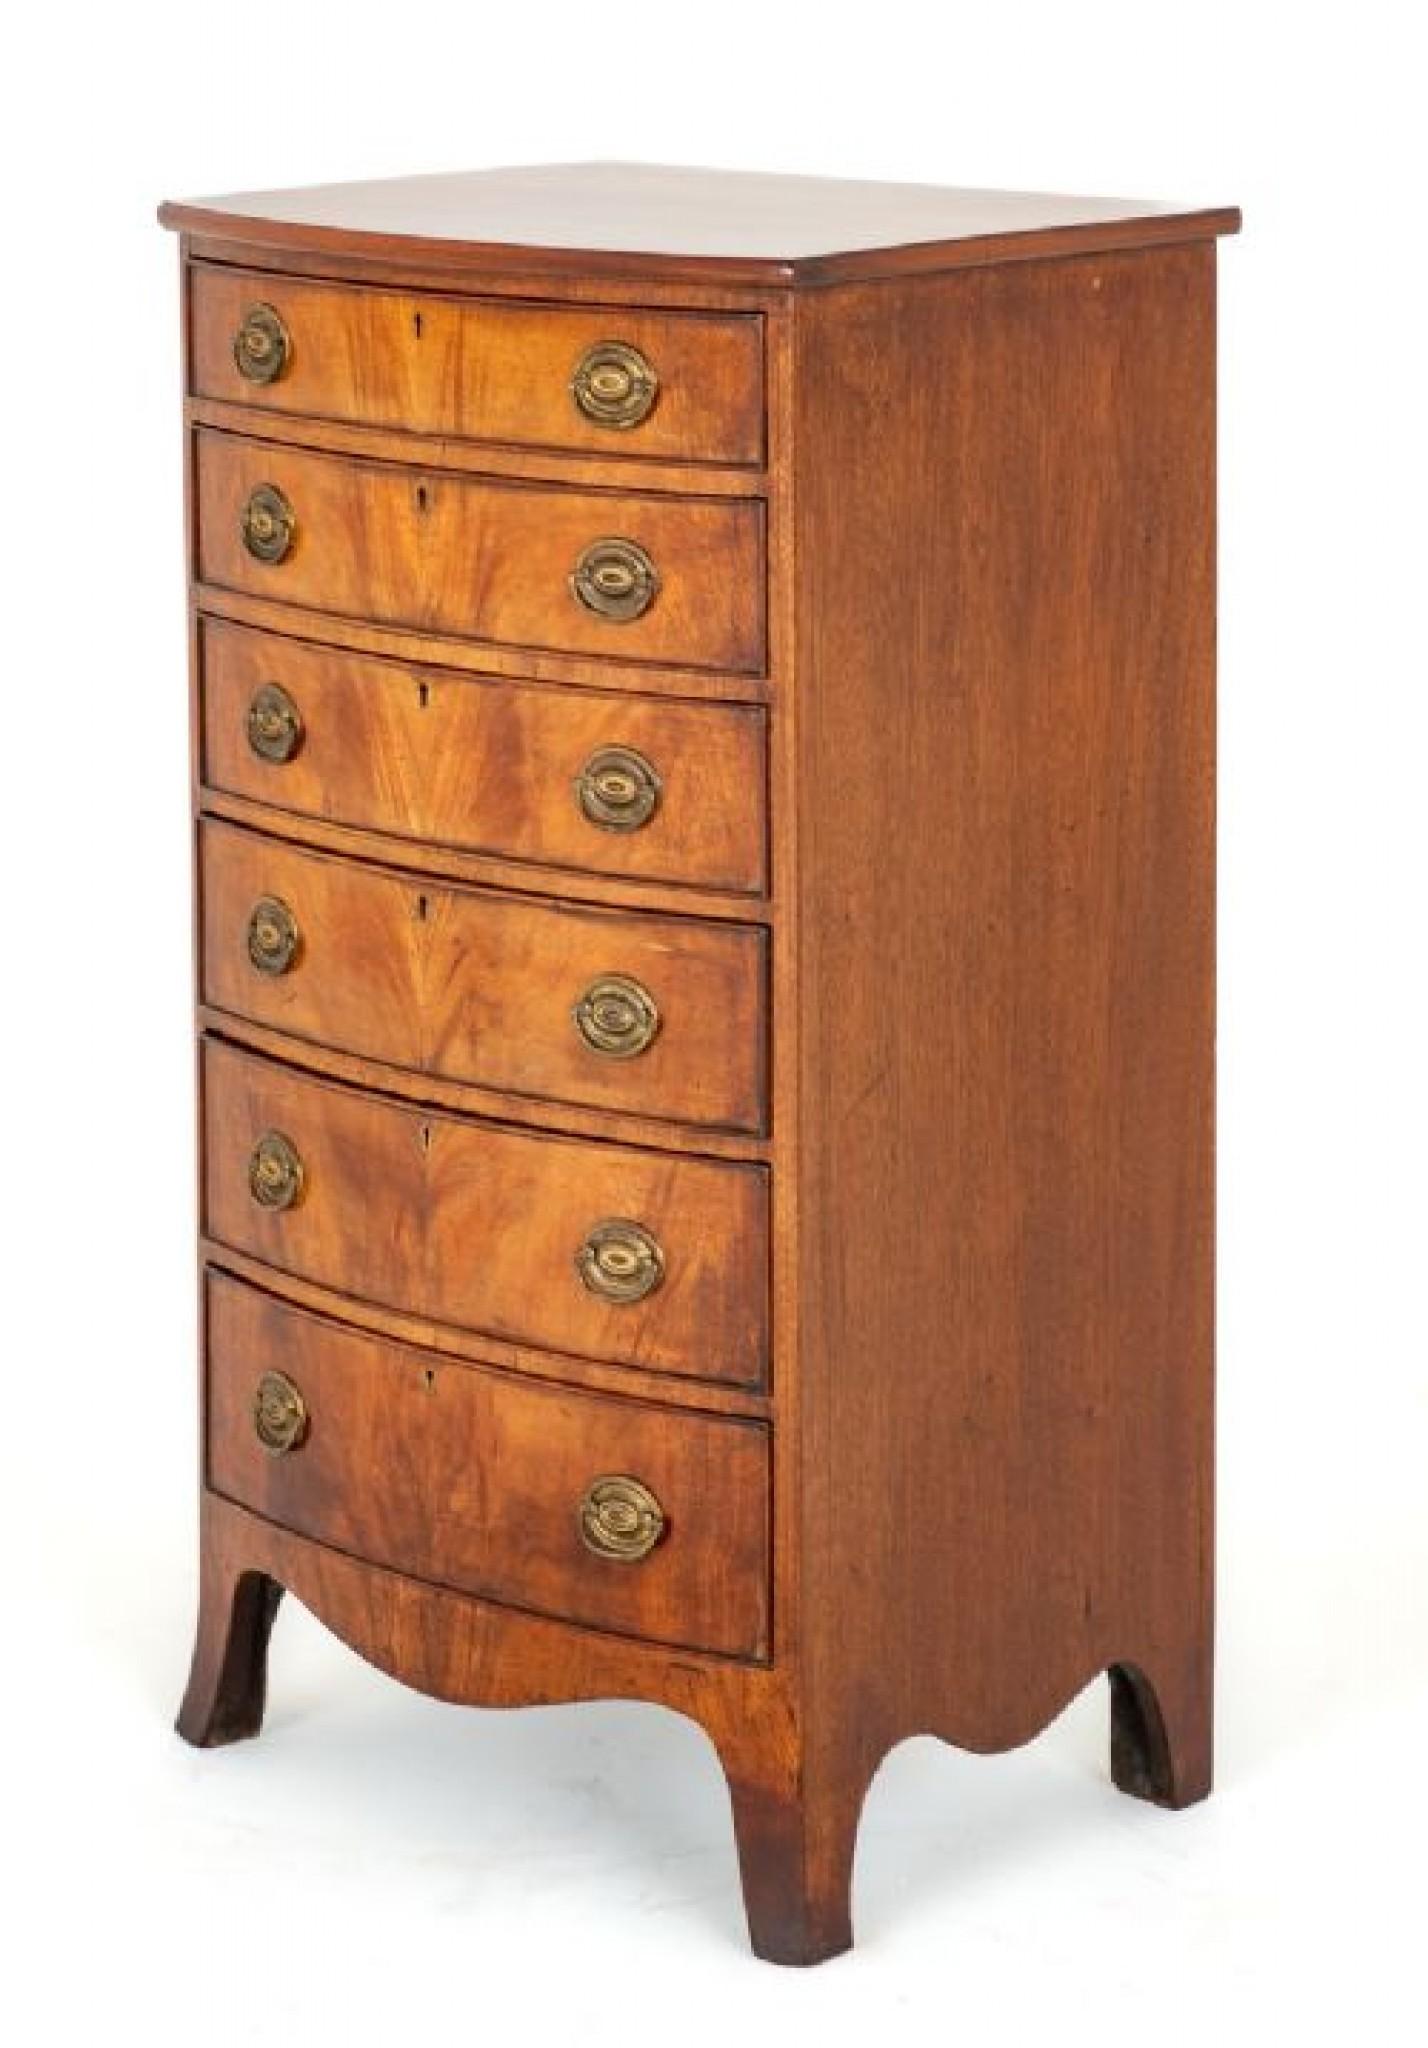 Elegant Mahogany Regency Style Bow Chest of Drawers.
Circa 1920
This Chest of Drawers Stands upon Splay feet with a Shaped Apron.
The Chest Features an Arrangement of 6 Oak Lined Graduated Drawers.
Each of the Drawers Having Brass Oval Plate Handles